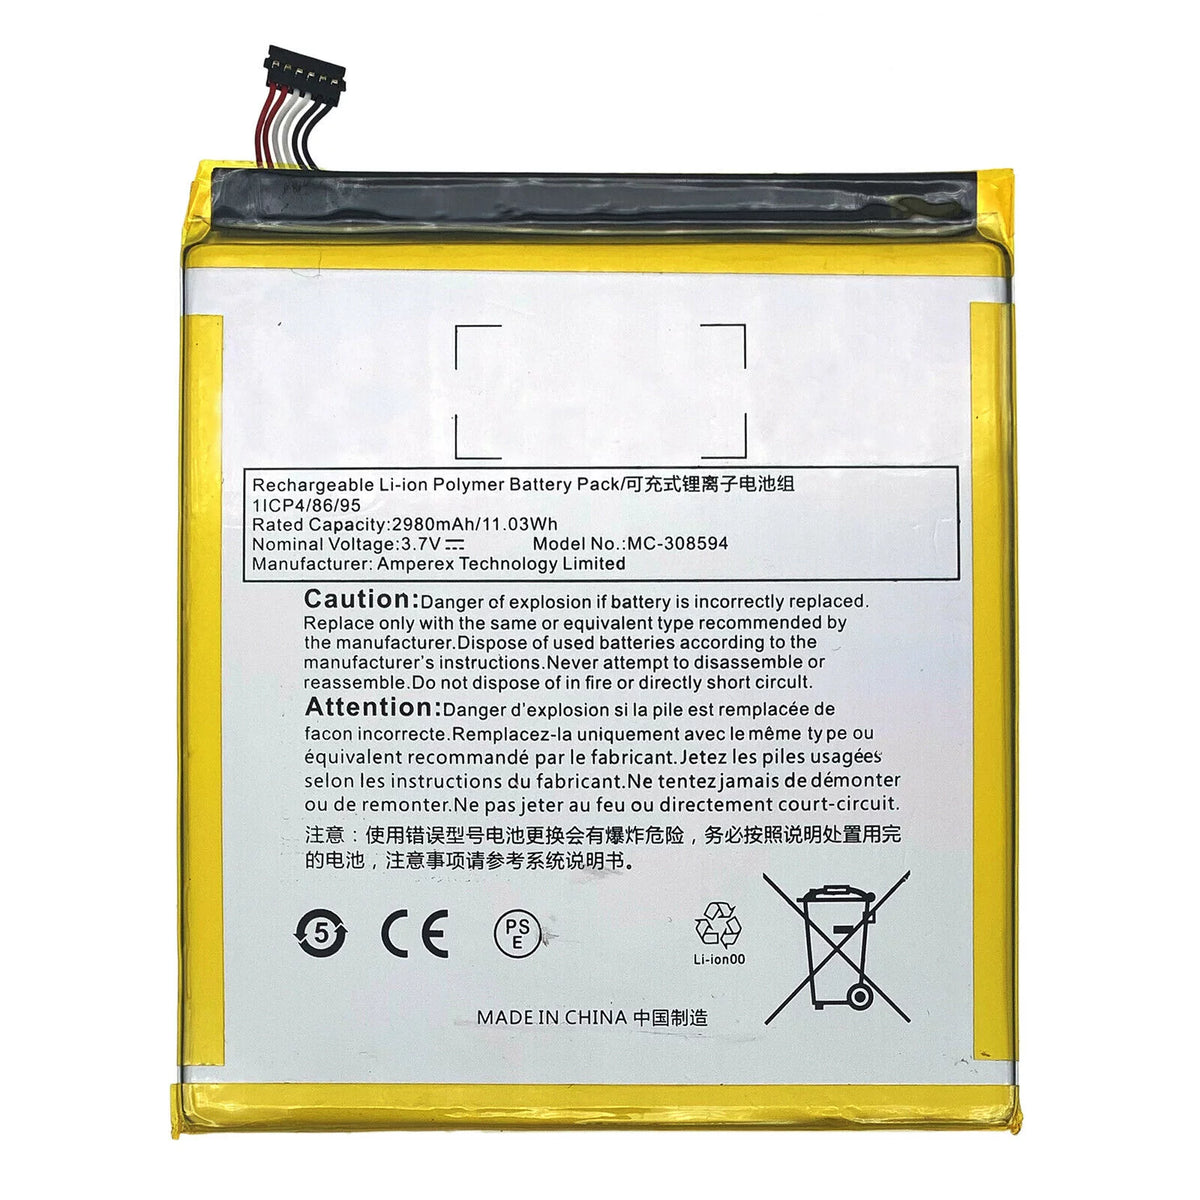 MOBILE BATTERY FOR KINDLE MC 308594 - Fire 7" 5th Generation